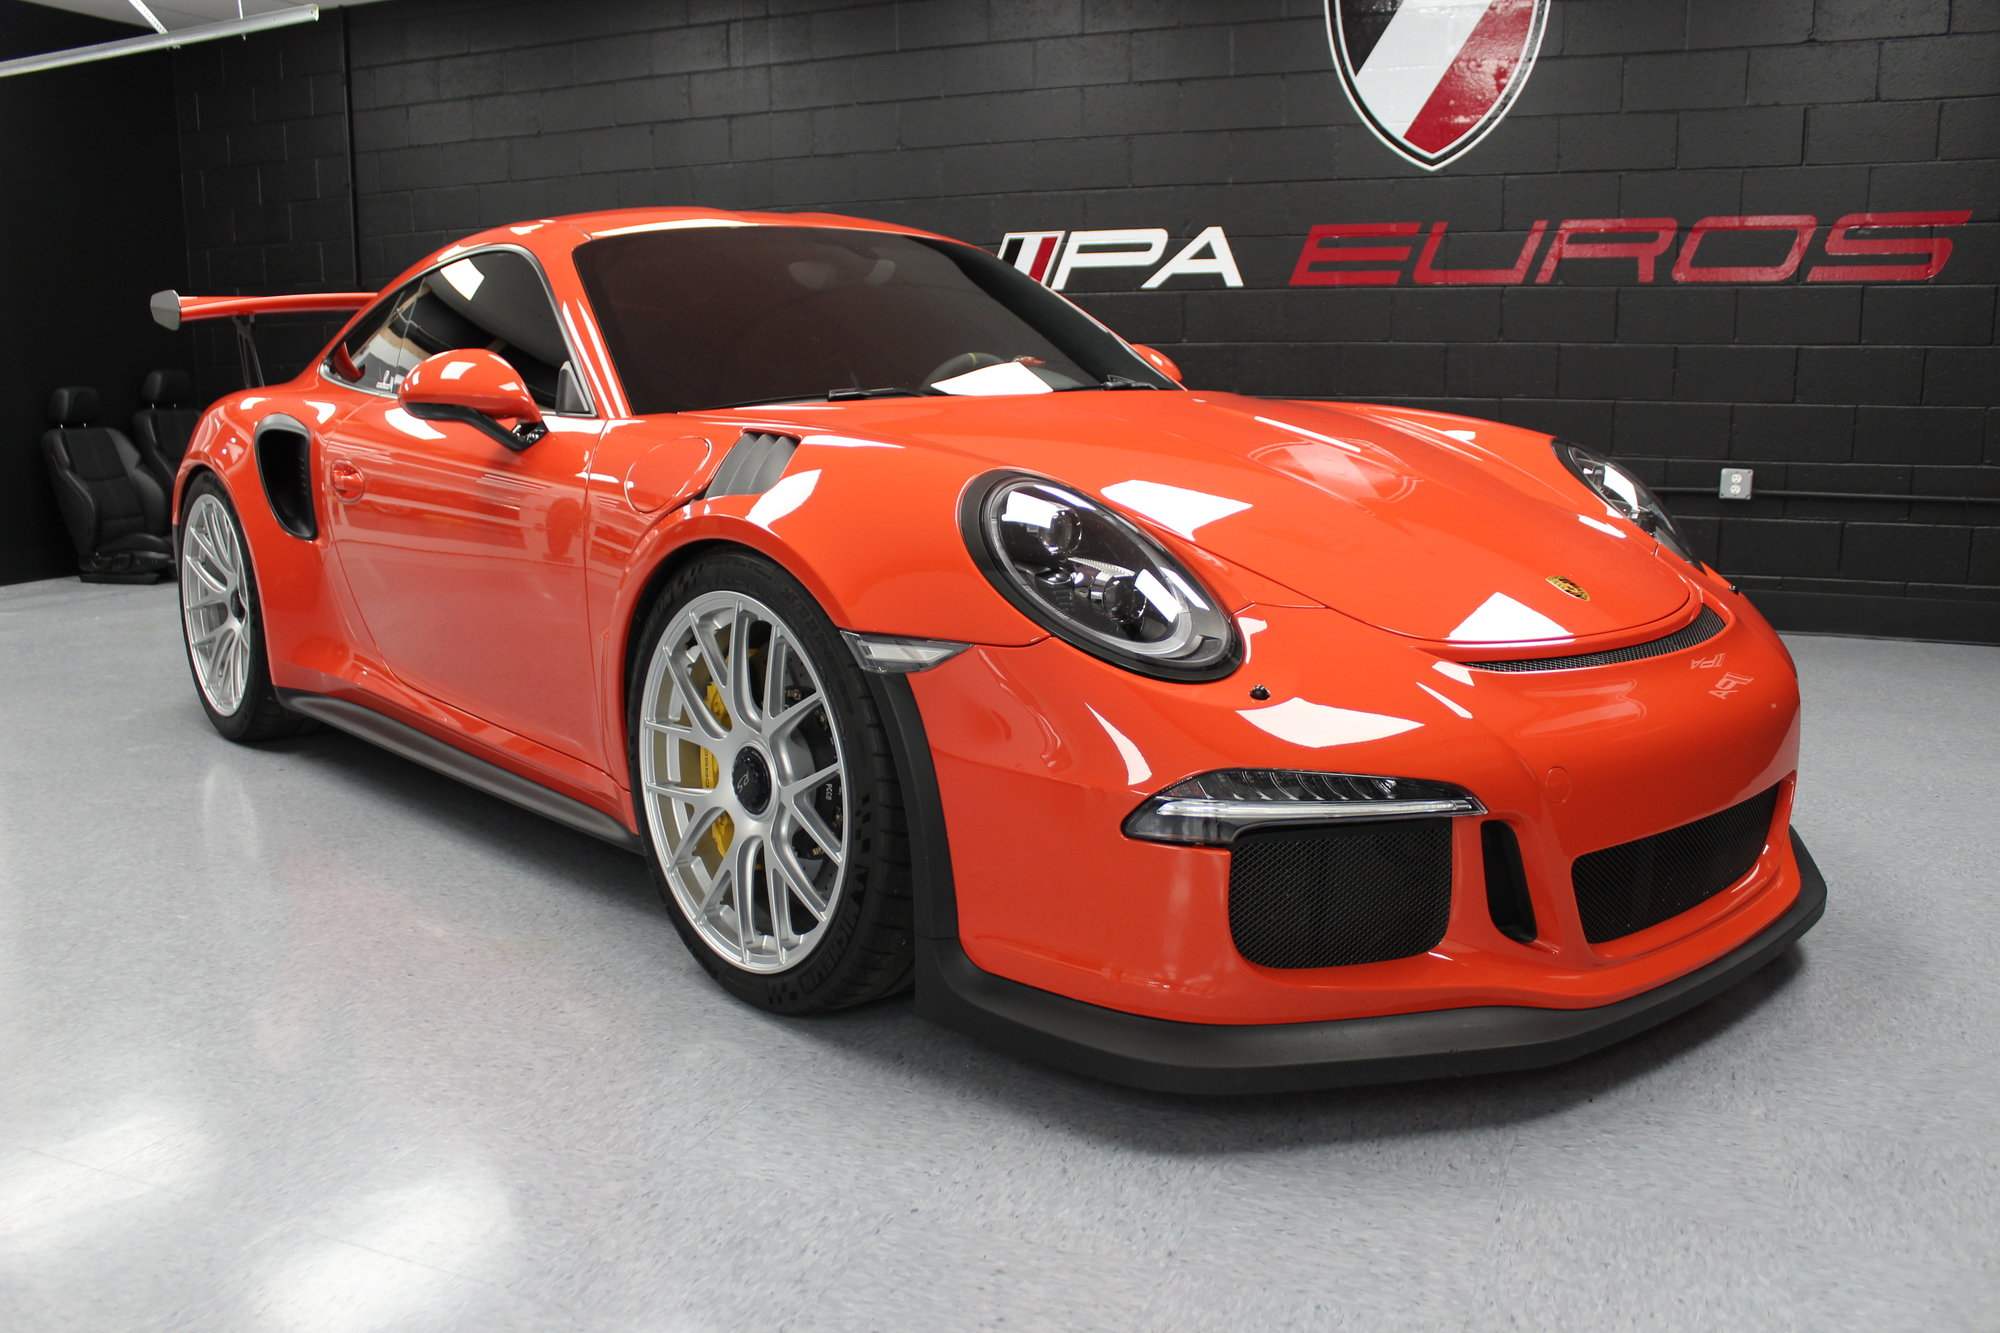 2016 Porsche 911 - 2016 GT3 RS 991.1 Lava Orange, Full Leather, FAL, PCCBs + CPO Warranty - Used - VIN WP0AF2A93GS192069 - 21,310 Miles - 6 cyl - 2WD - Automatic - Coupe - Orange - Exton, PA 19341, United States